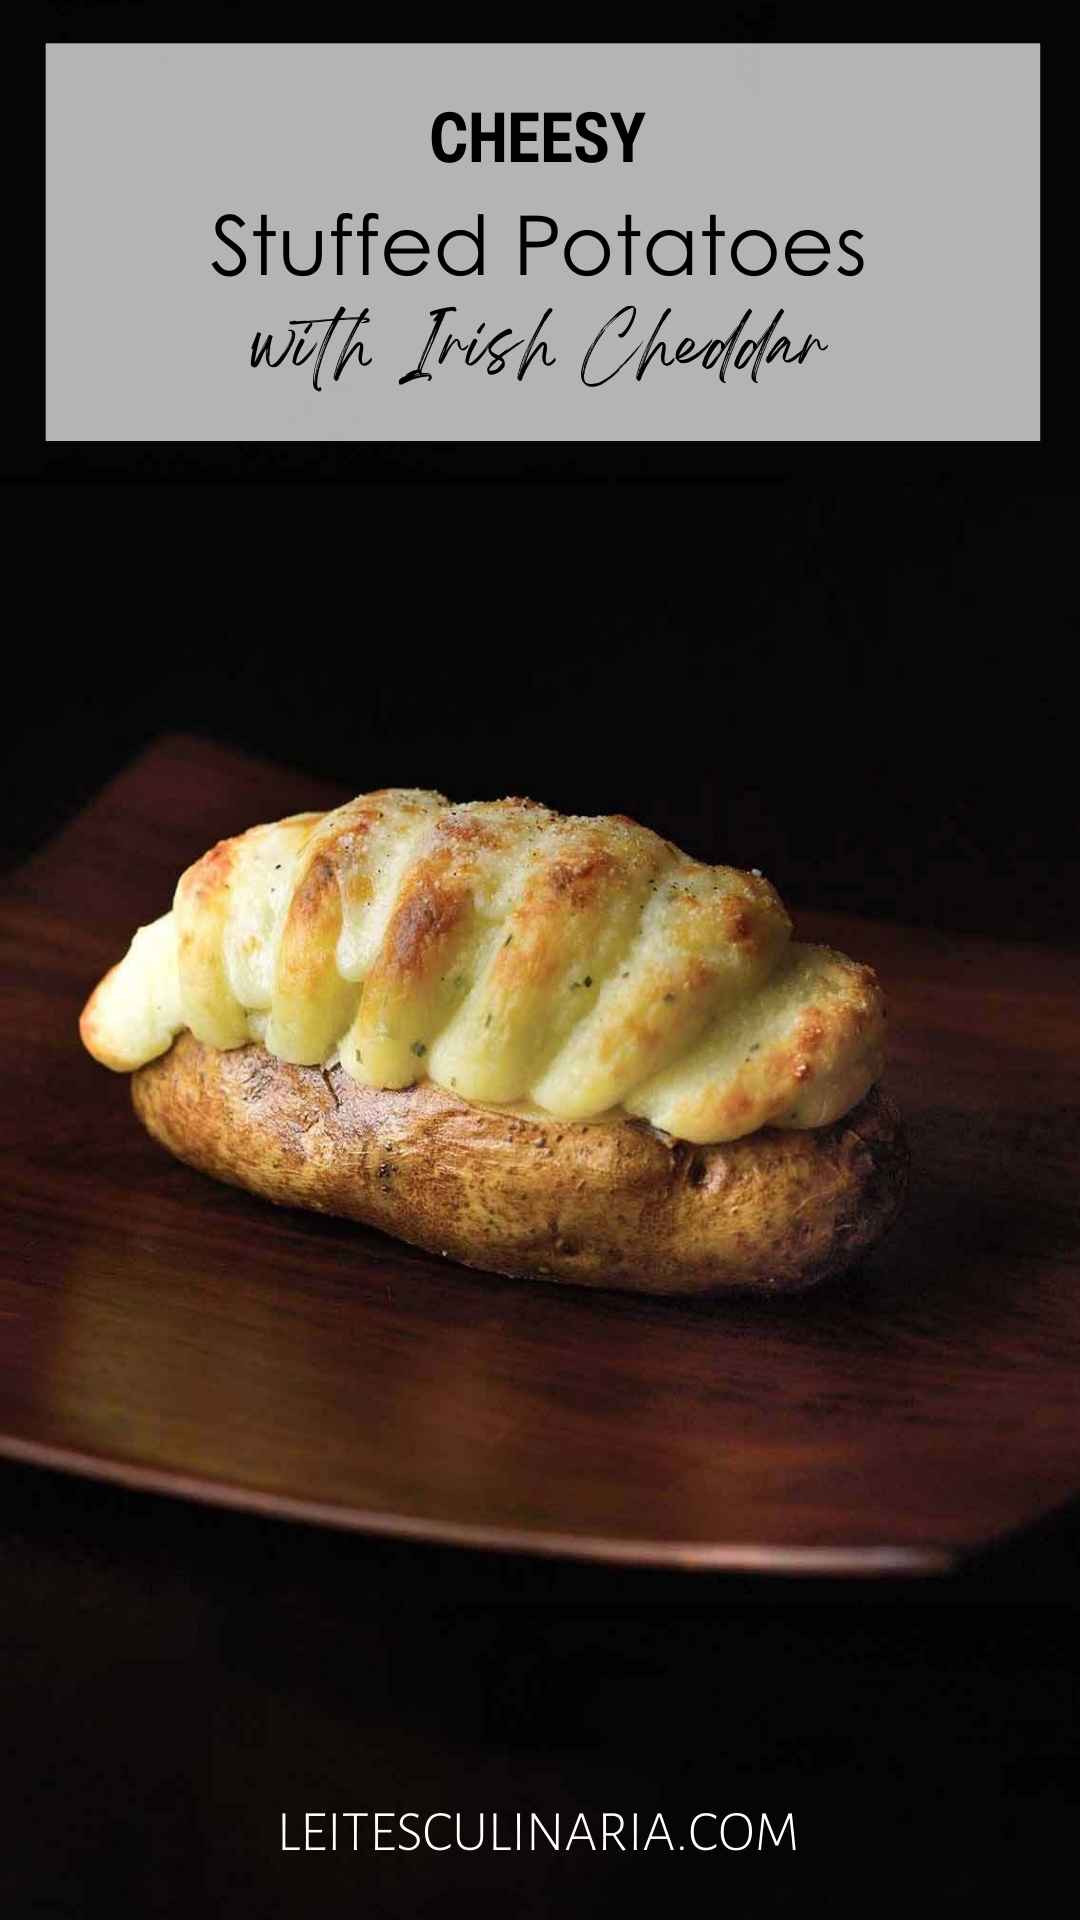 A baked potato stuffed with mashed potato and cheddar stuffing piped into it.